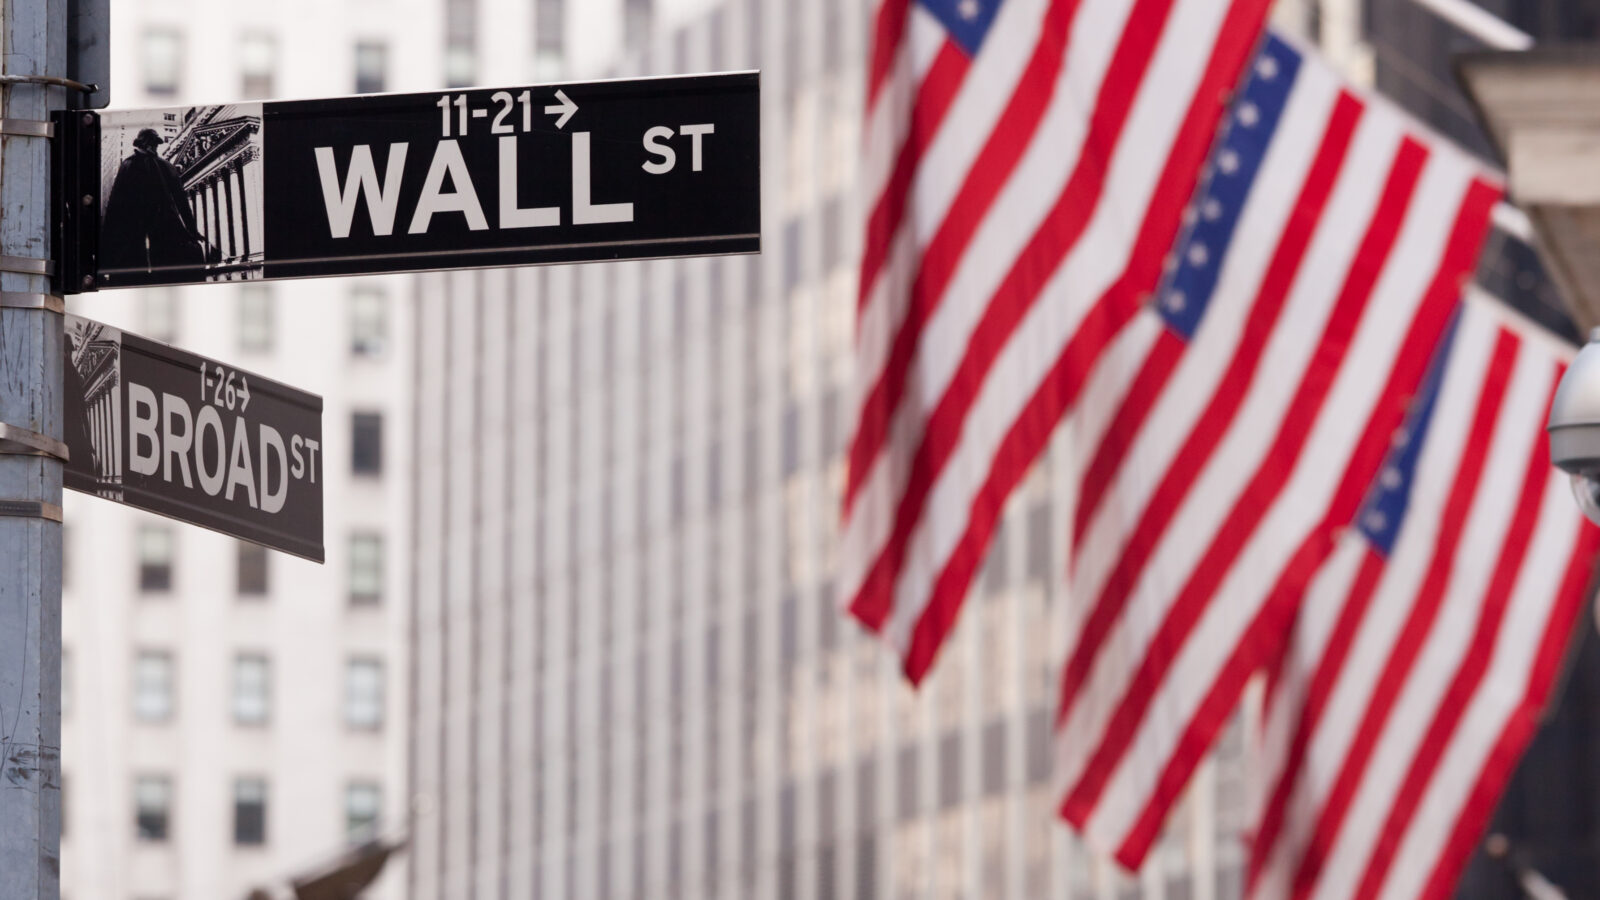 The Signage on Wall Street in the Financial District of New York City with American Flags in the background.